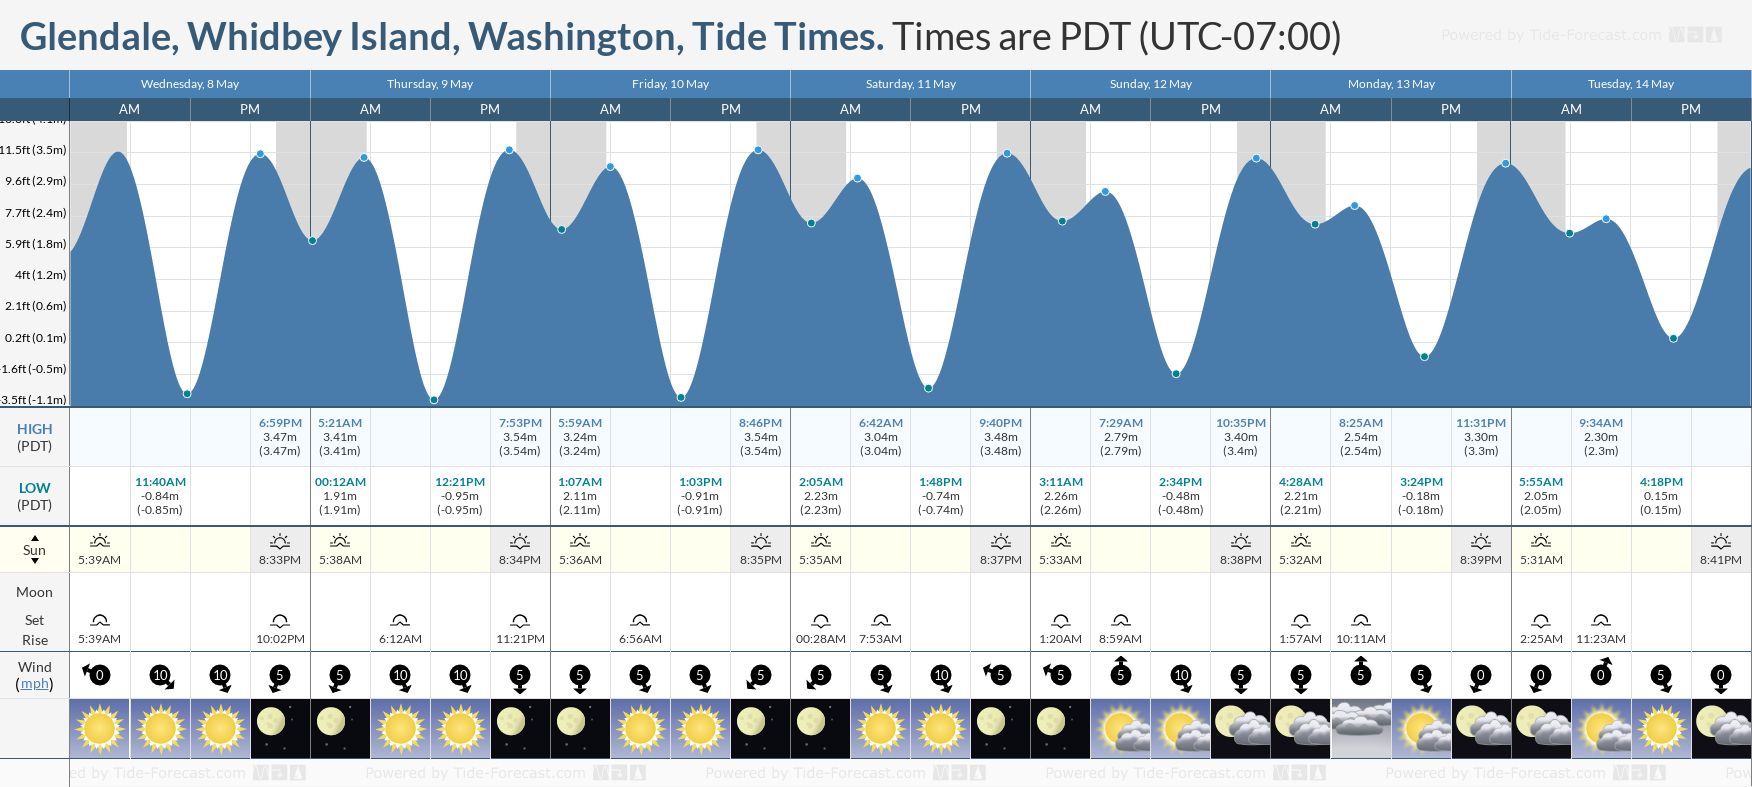 Glendale, Whidbey Island, Washington Tide Chart including high and low tide tide times for the next 7 days